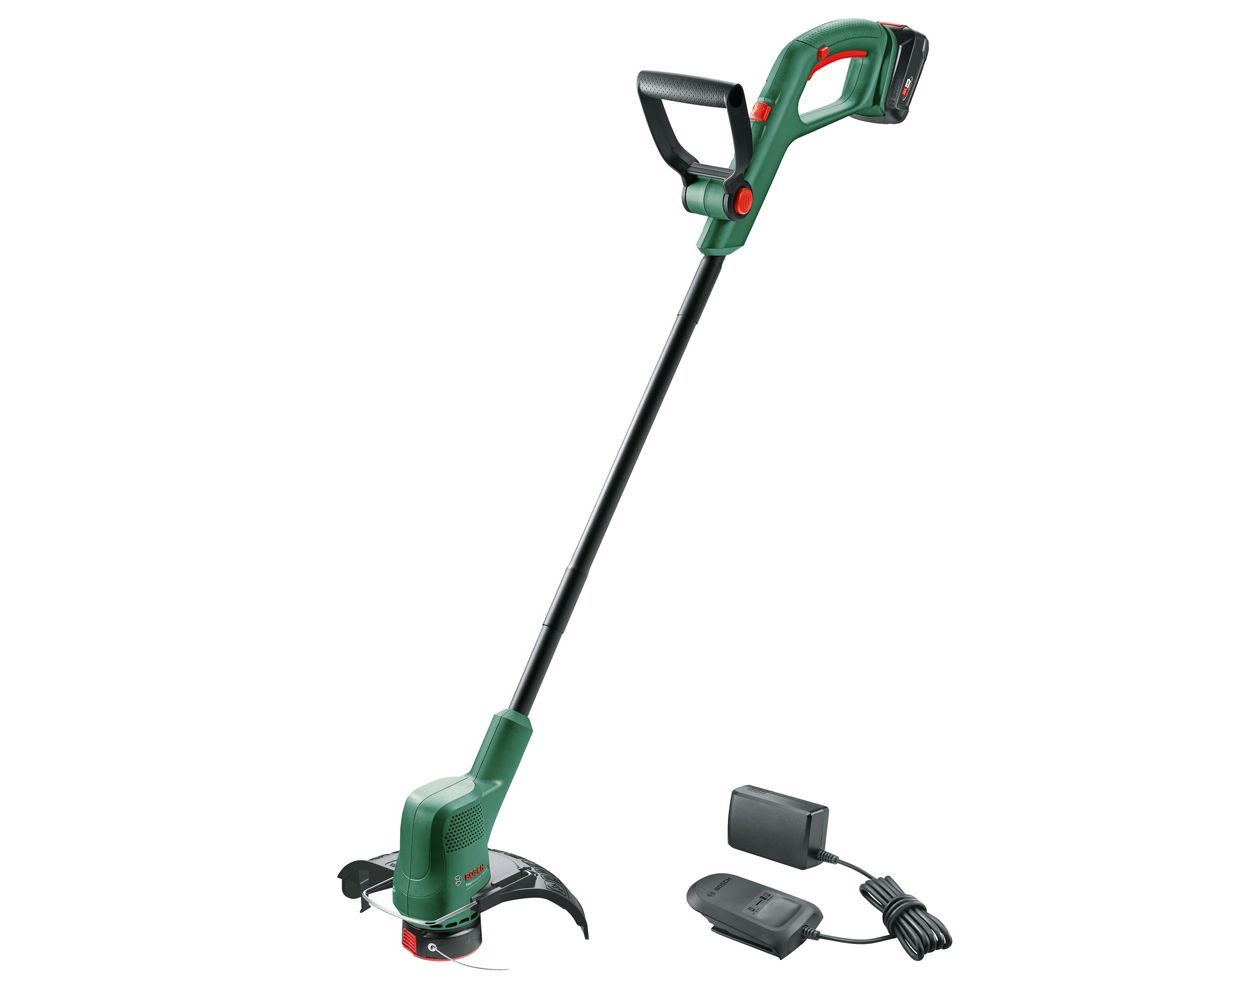 New growth in the Professional 18V System: Outdoor equipment like cordless  grass trimmer and brush cutter from Bosch - Bosch Media Service